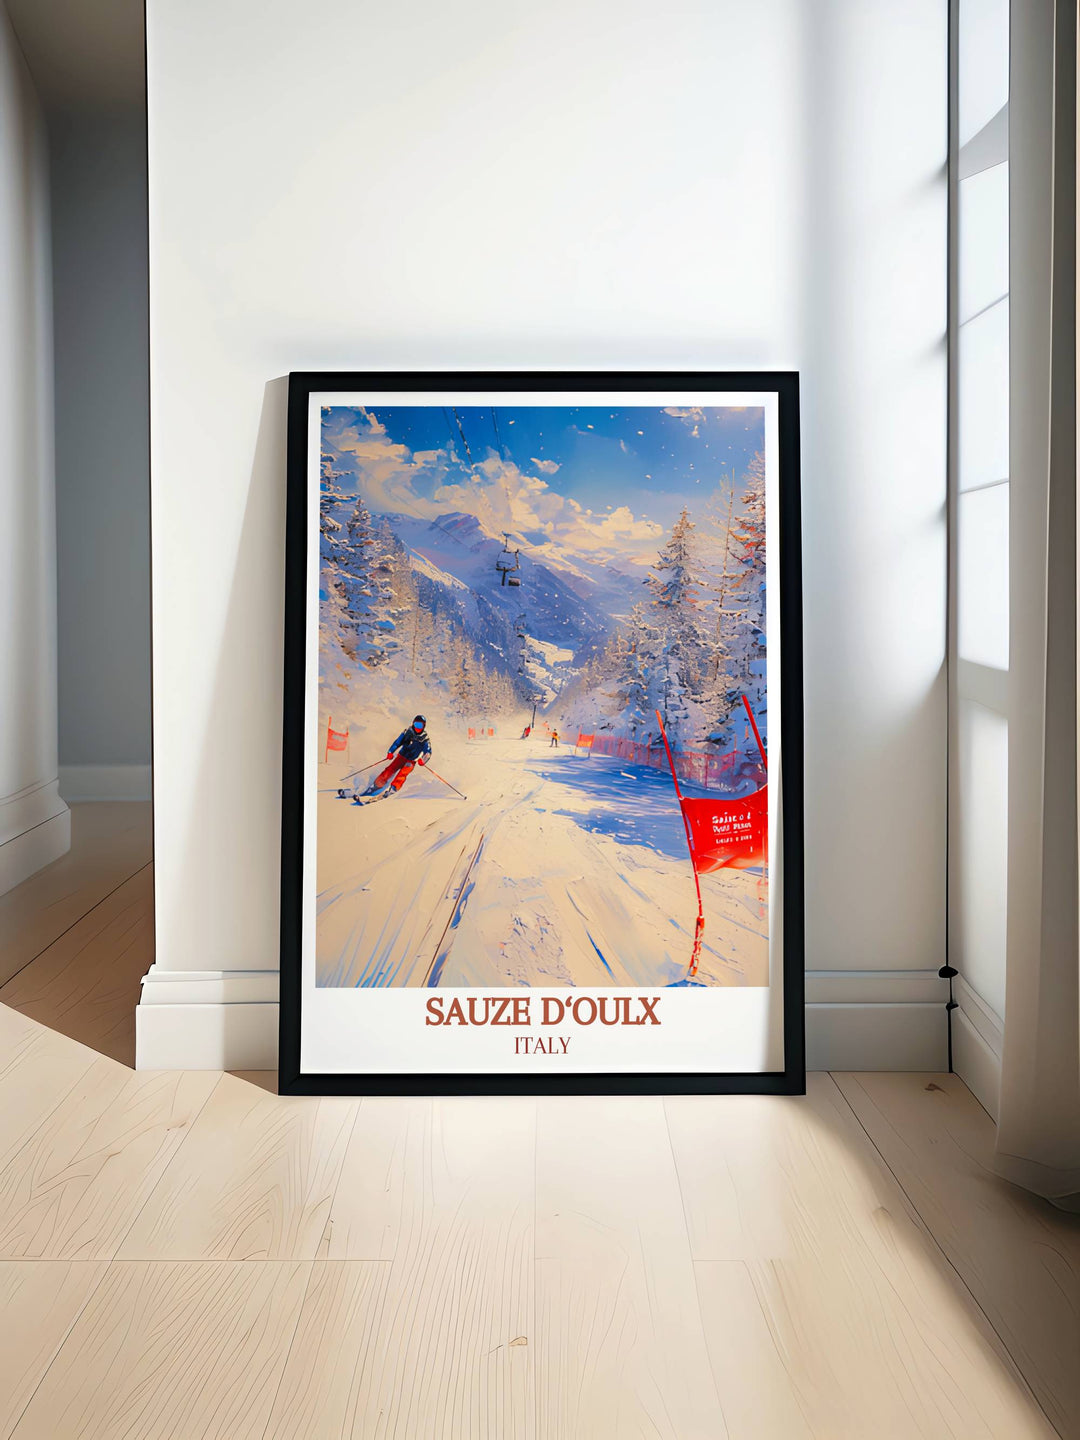 Sauze dOulx Ski Resort Fine Art Prints capturing the thrilling slopes and stunning landscapes of the Italian Alps, perfect for adding adventure to your home decor.